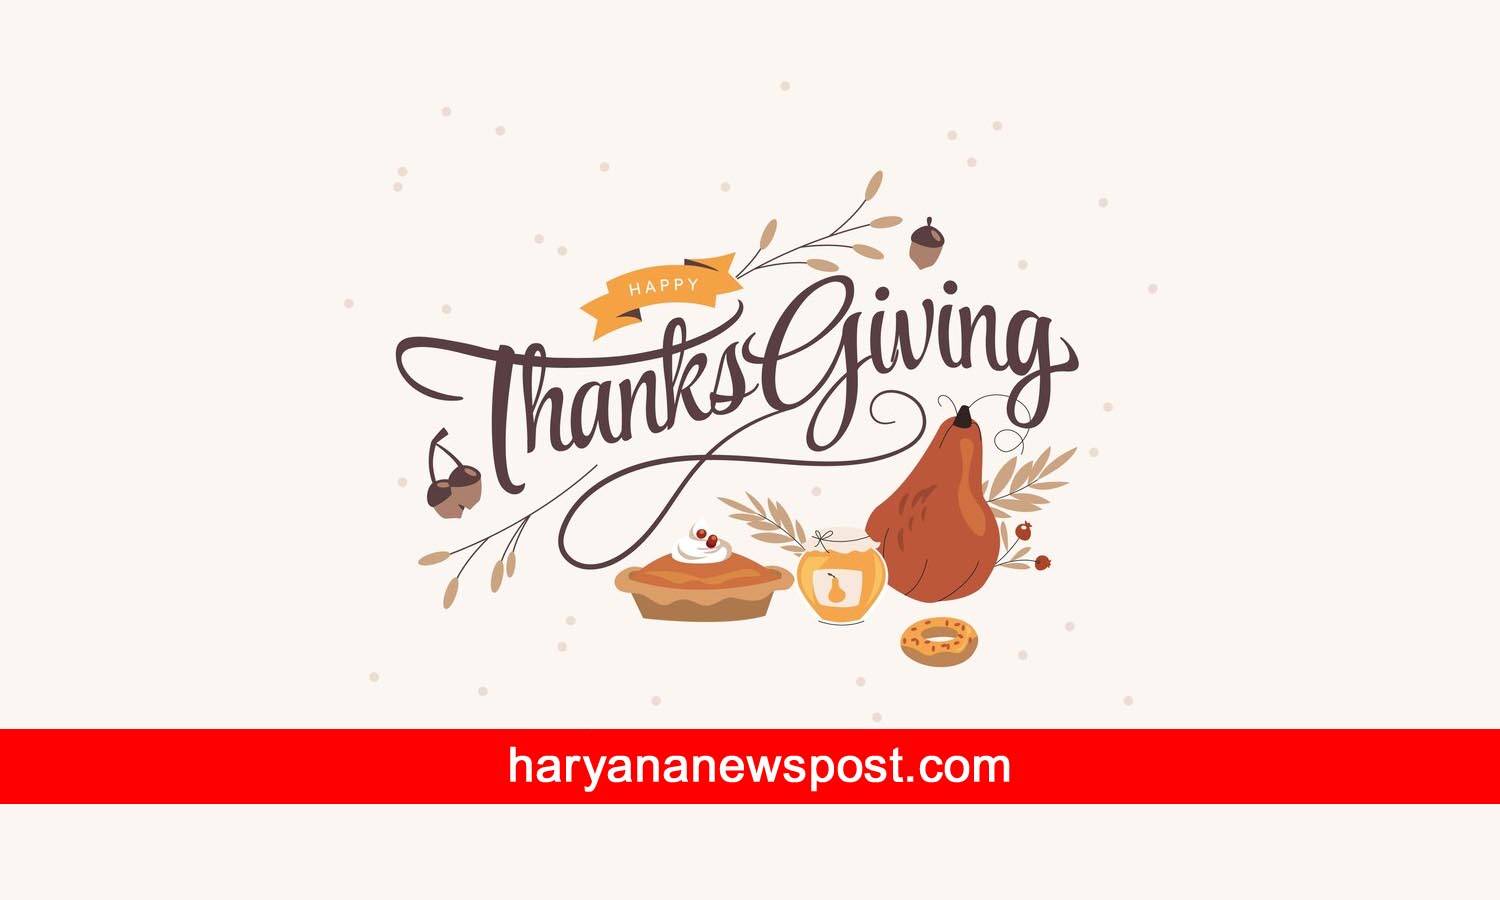 Religious Thanksgiving Messages – Christian Quotes, Wishes